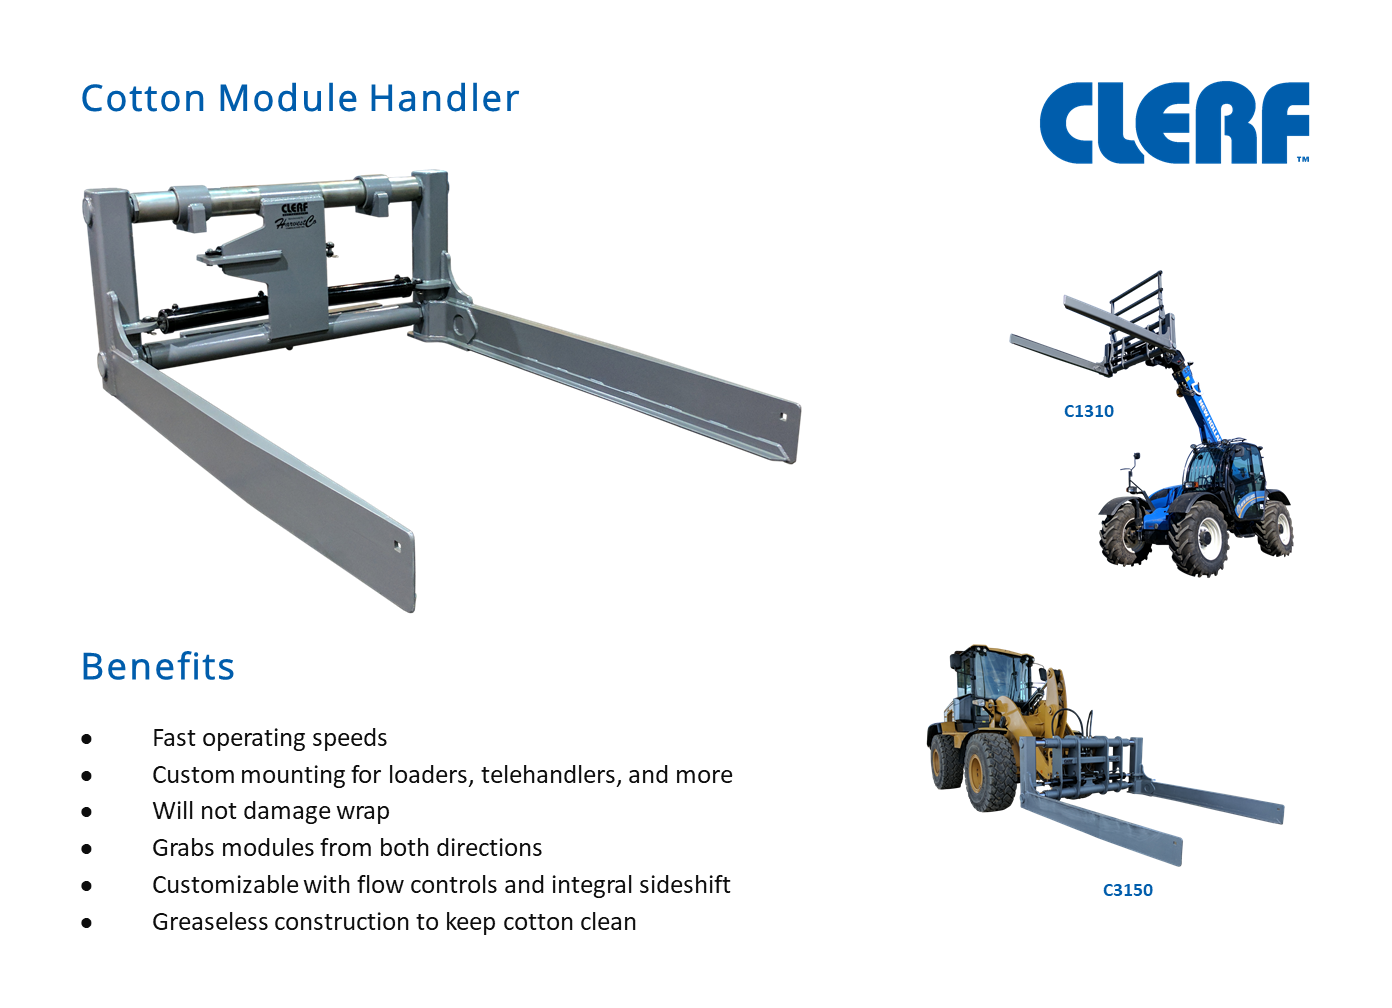 Clerf Cotton Module Handler Specification A